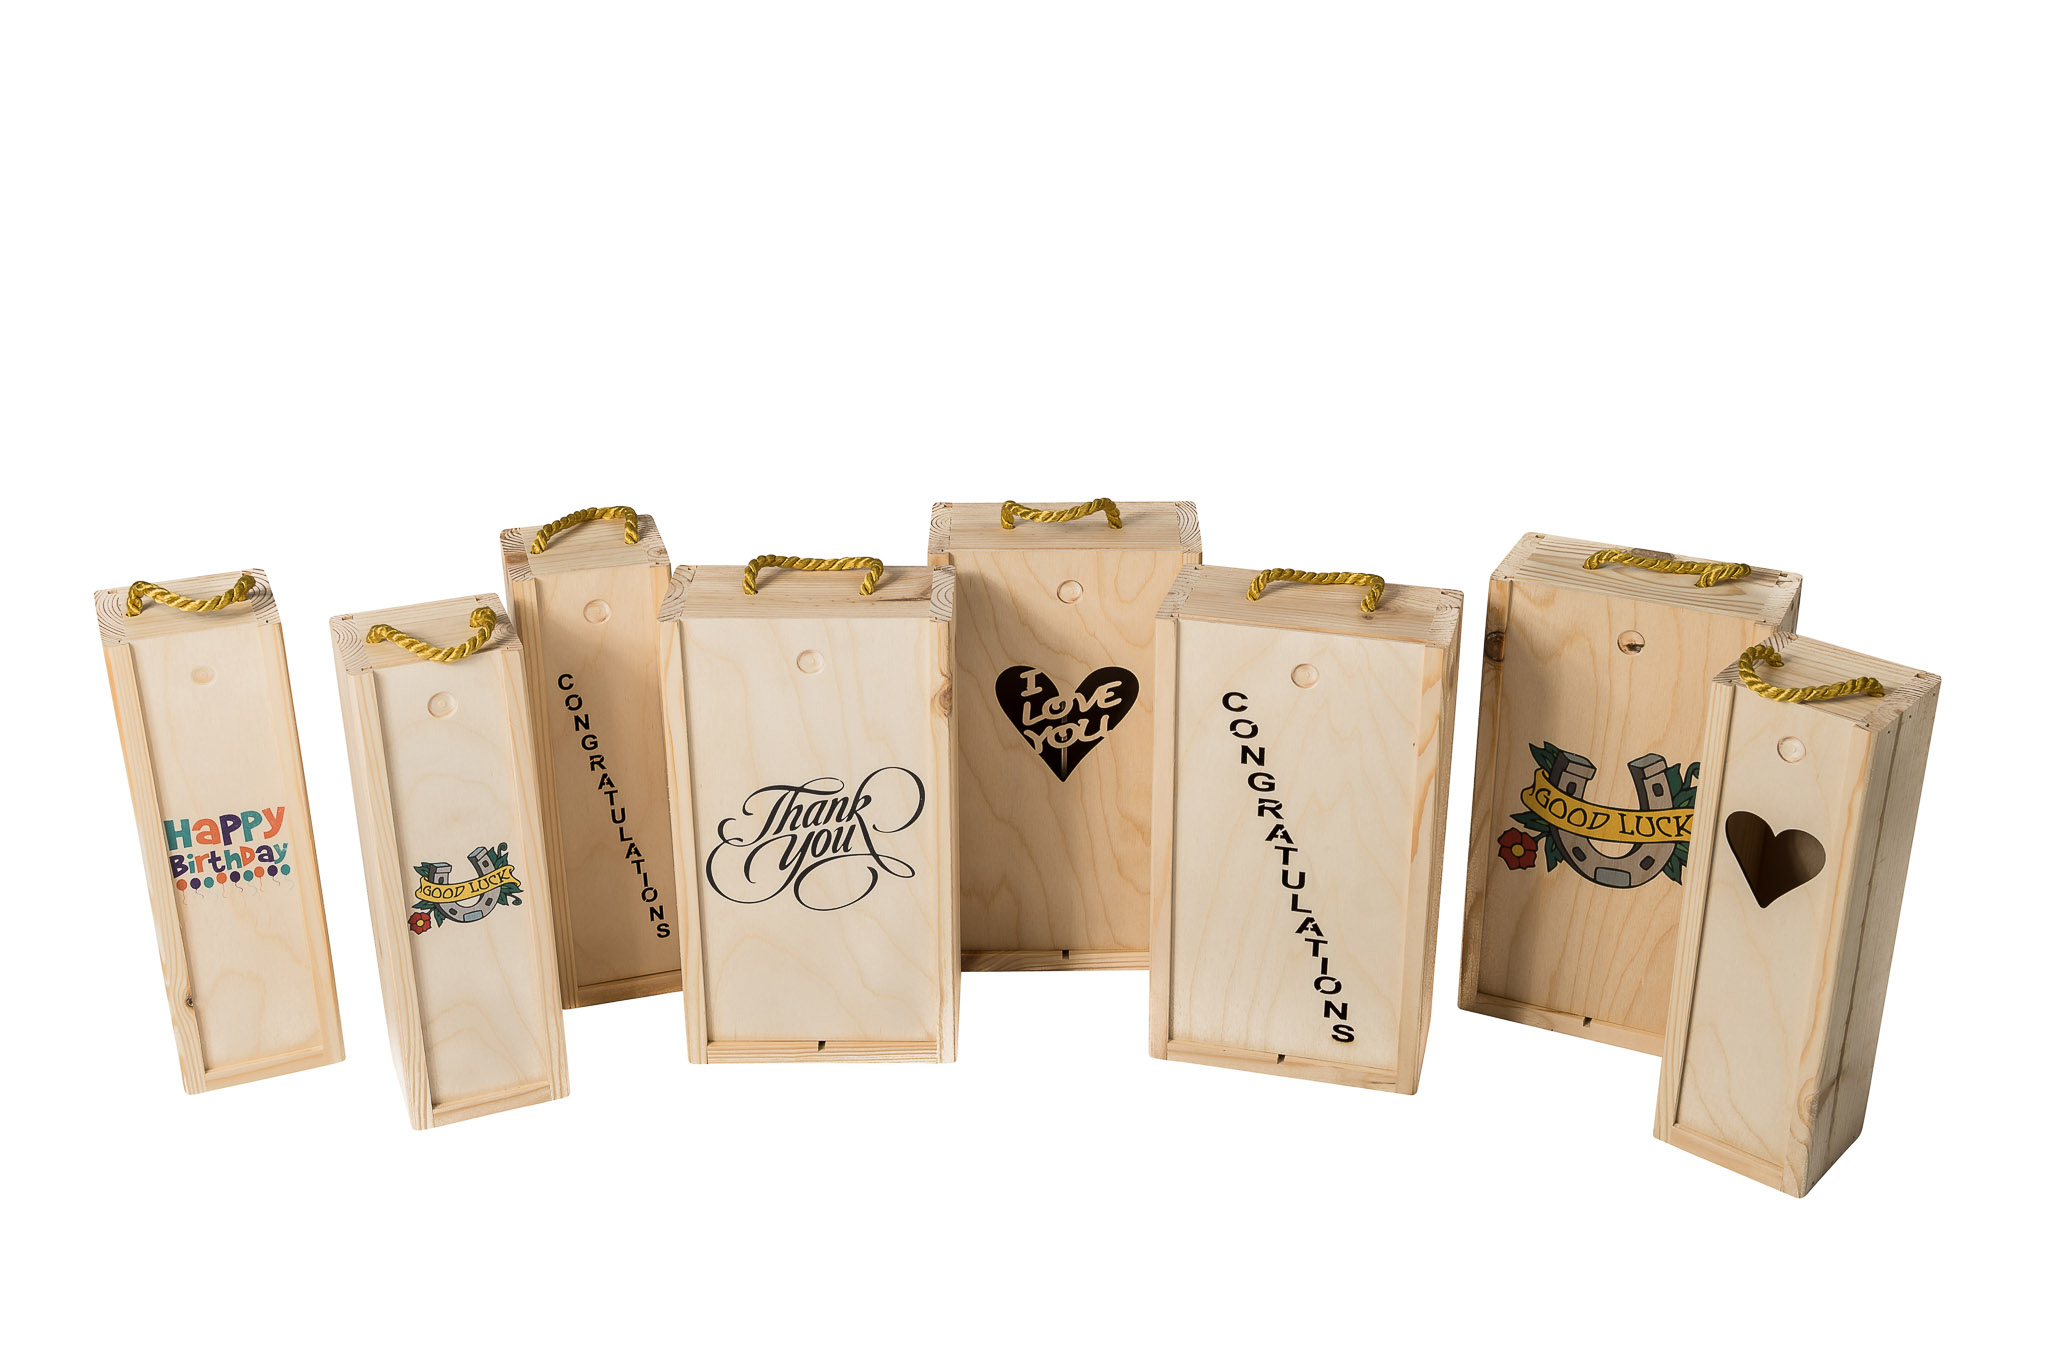 Printed Wooden Wine Boxes